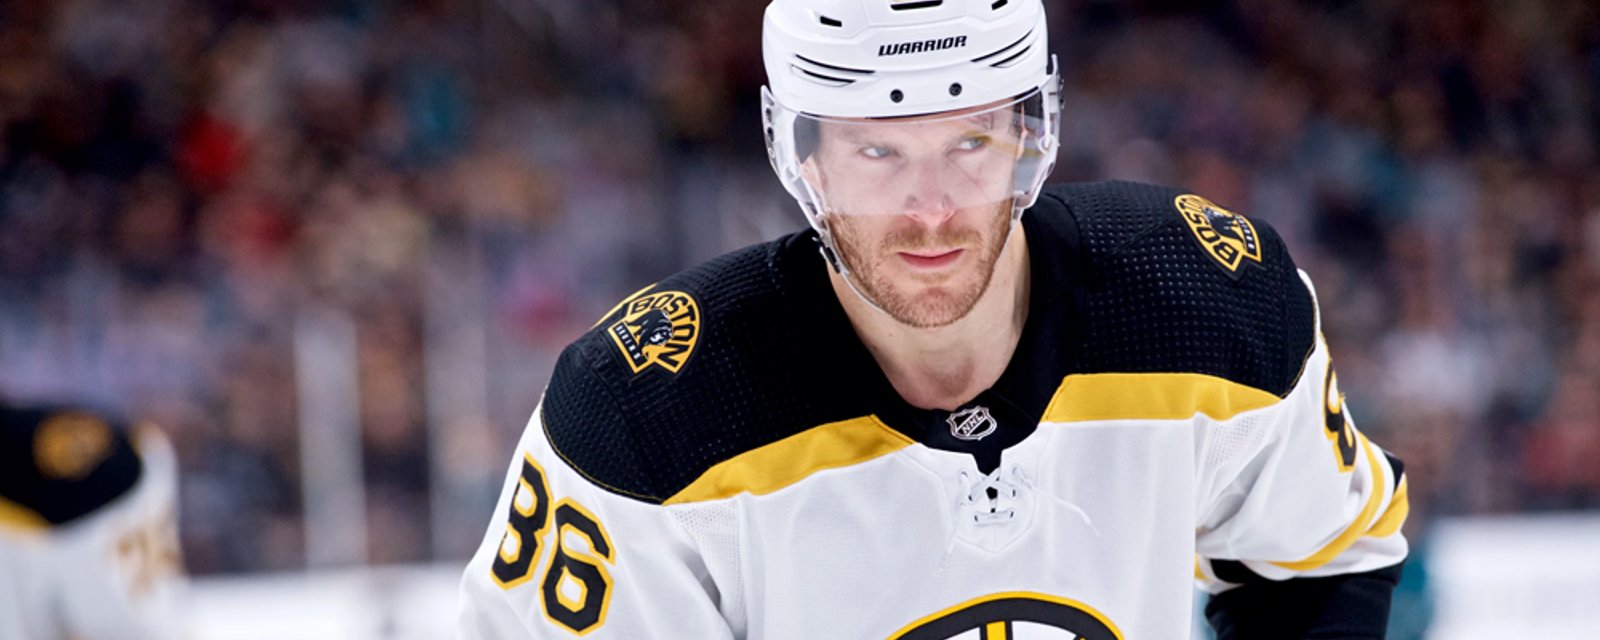 After four knee surgeries, Kevan Miller’s NHL career looks to be over